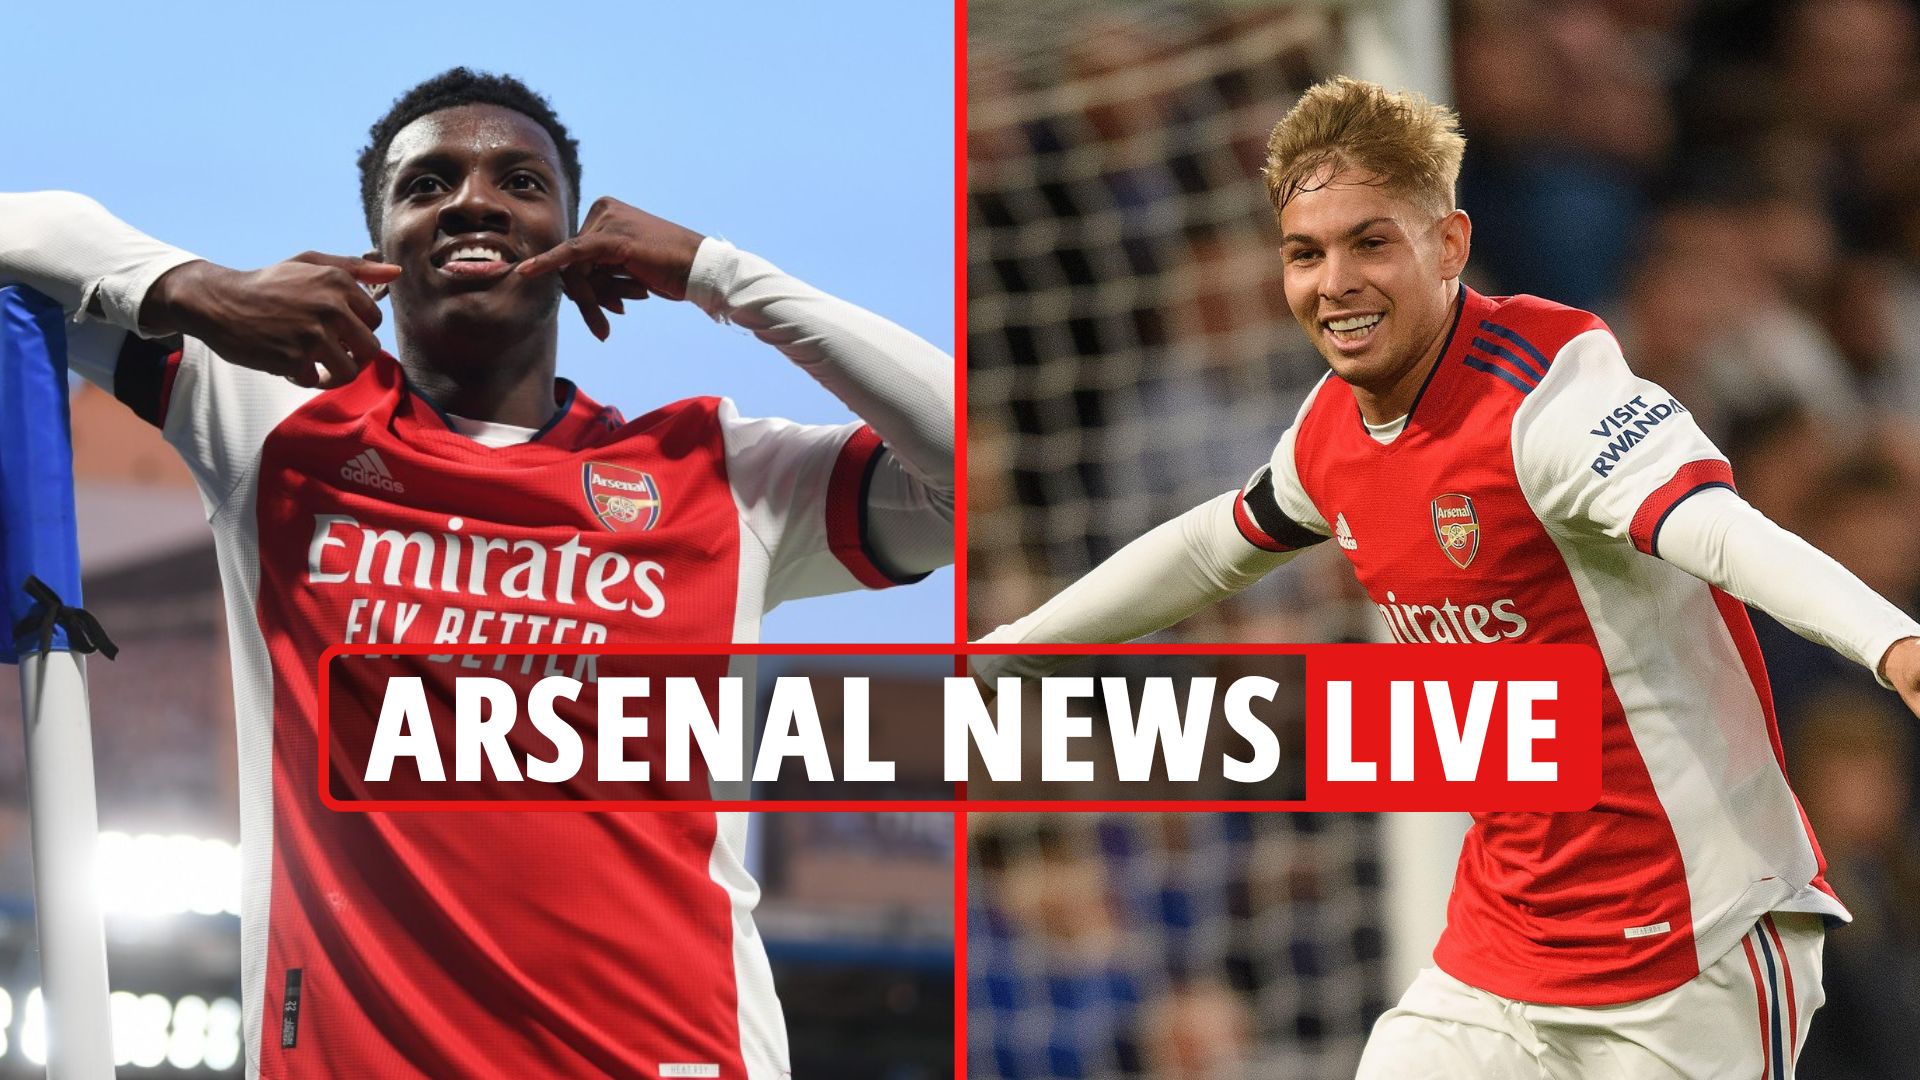 Arsenal news LIVE: Latest transfer news and updates from the Emirates